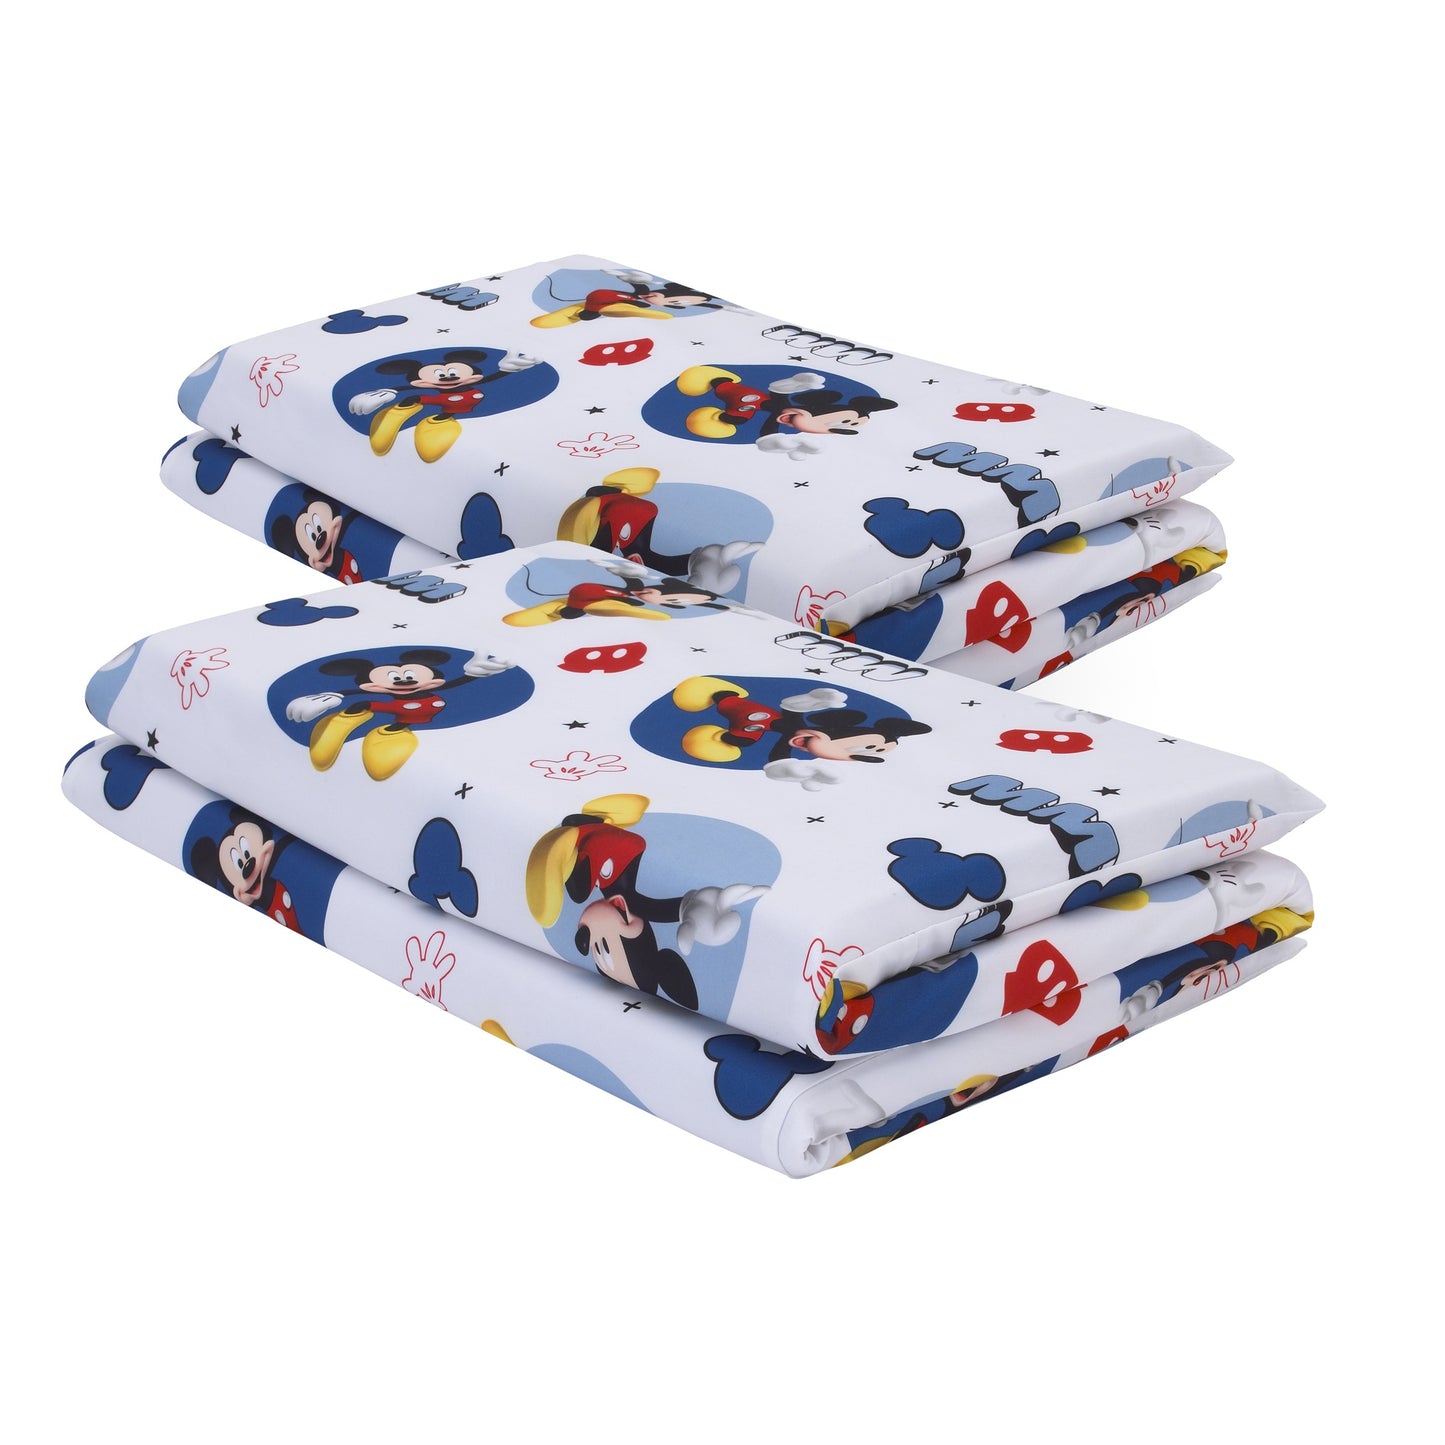 Disney Mickey Mouse - Navy, White, and Red 2 Pack Preschool Nap Pad Sheets